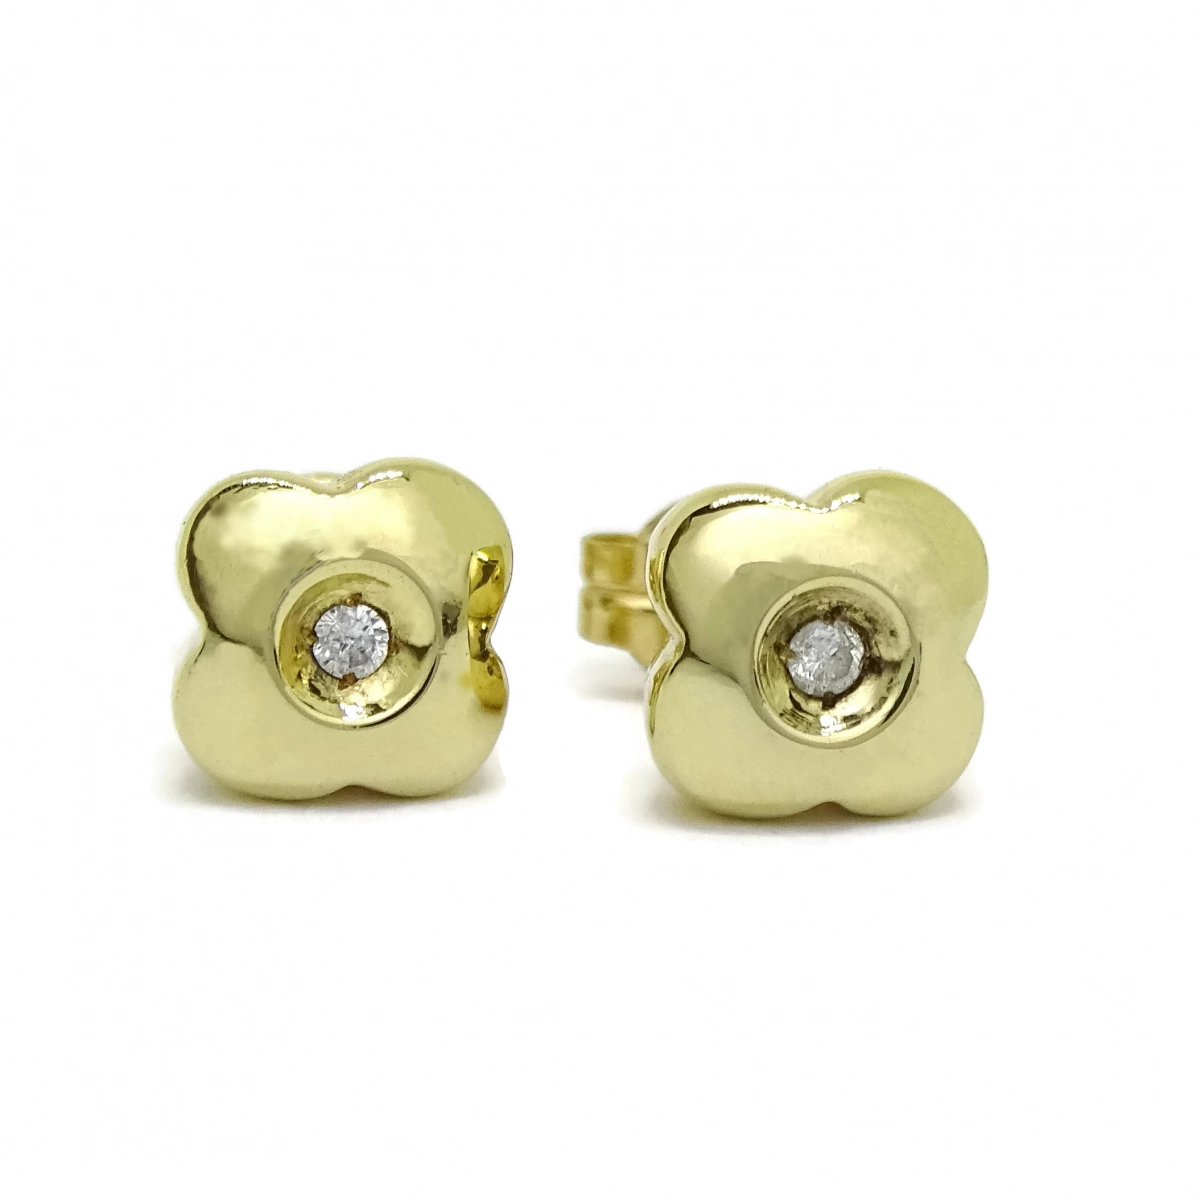 EARRINGS 0.03 CTS OF DIAMONDS, IN YELLOW GOLD WITH FLOWER SHAPE. CLOSING PRESSURE�N. 0.90 CM DI�M NEVER SAY NEVER